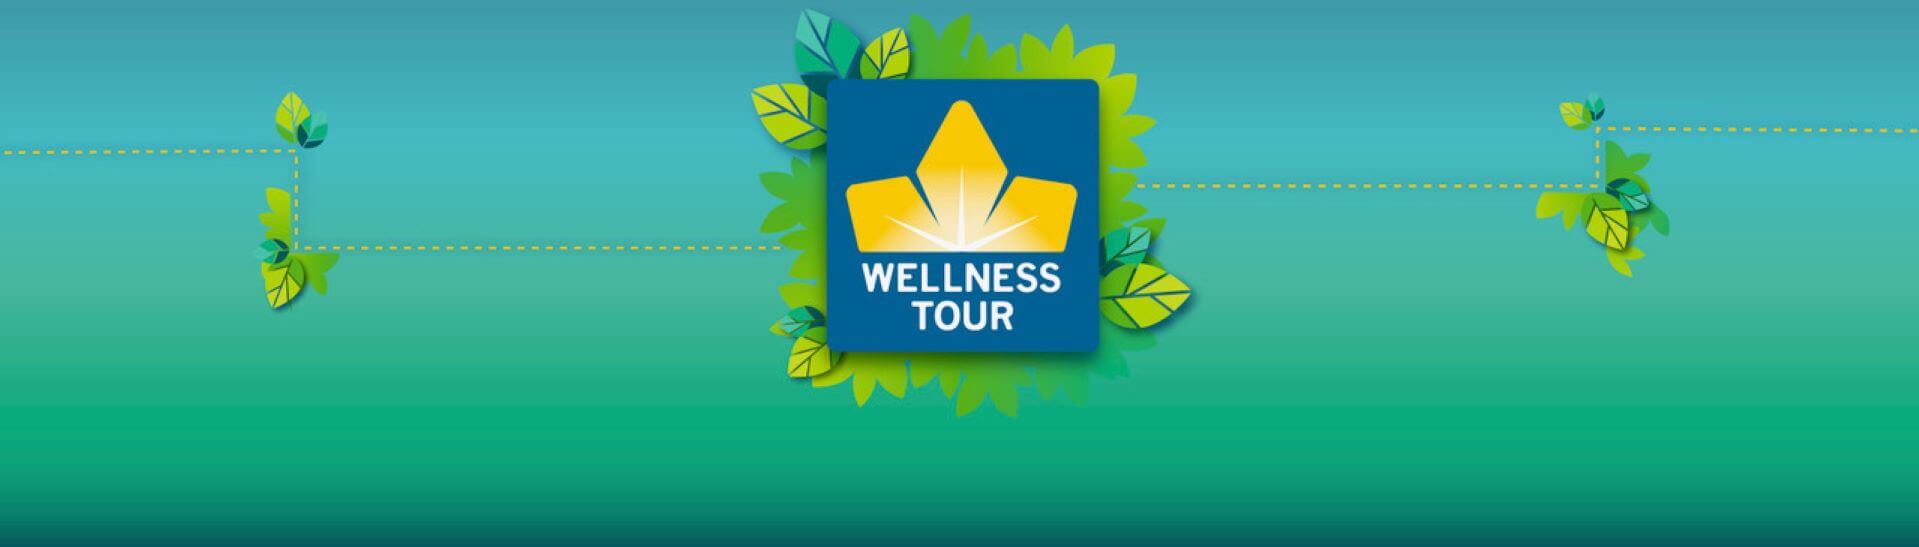 Annual Wellness Tour July 12-16